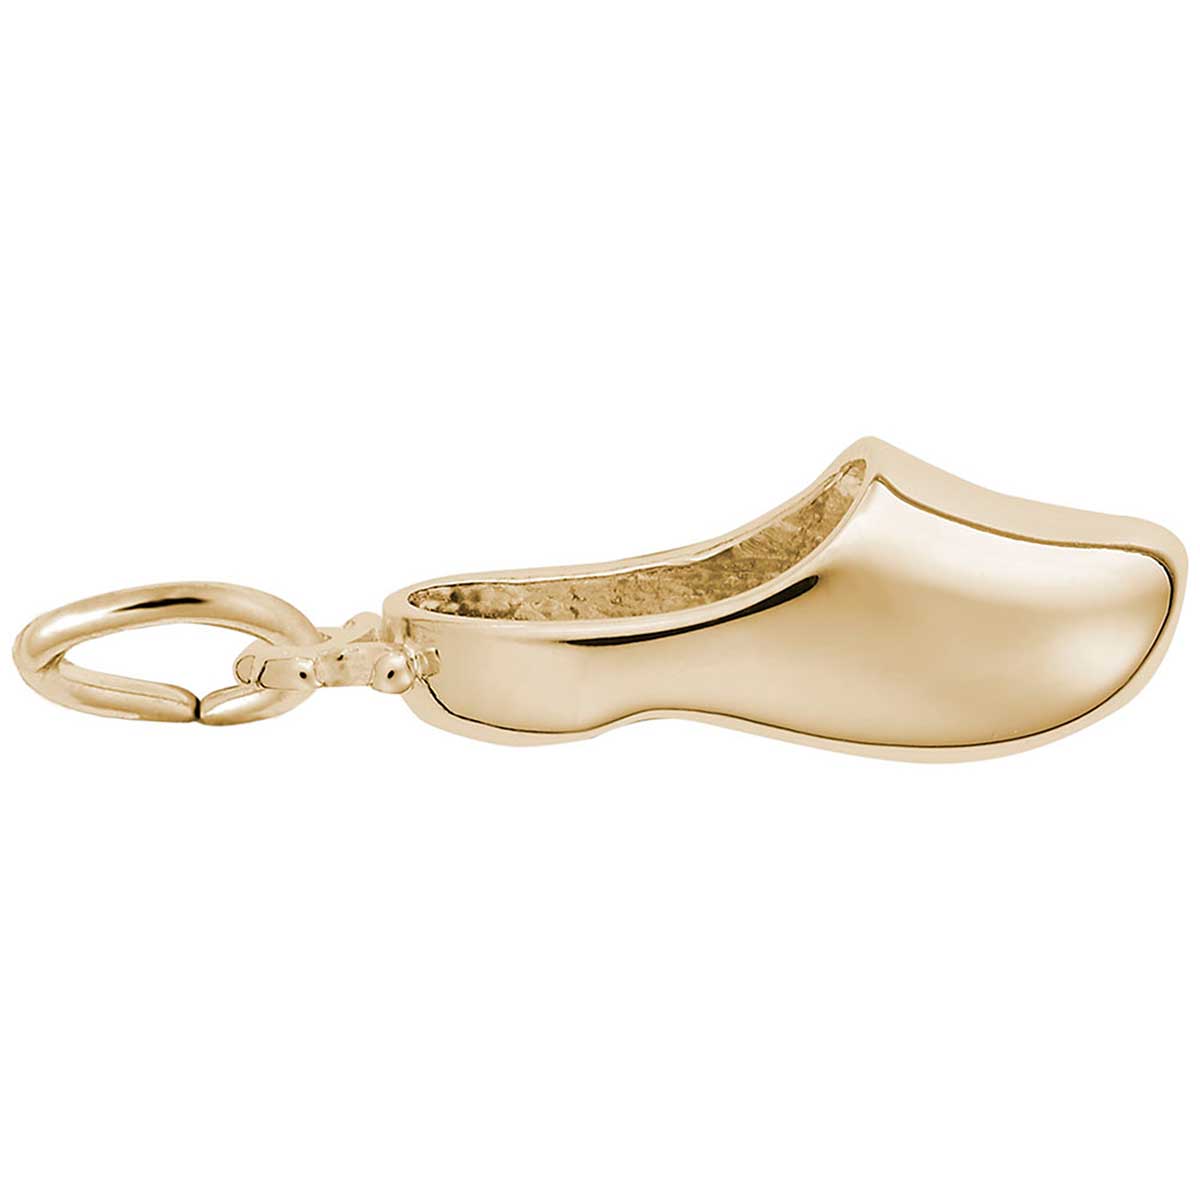 Rembrandt Charms Dutch Shoes Charm with Lobster Clasp 10K Yellow Gold 